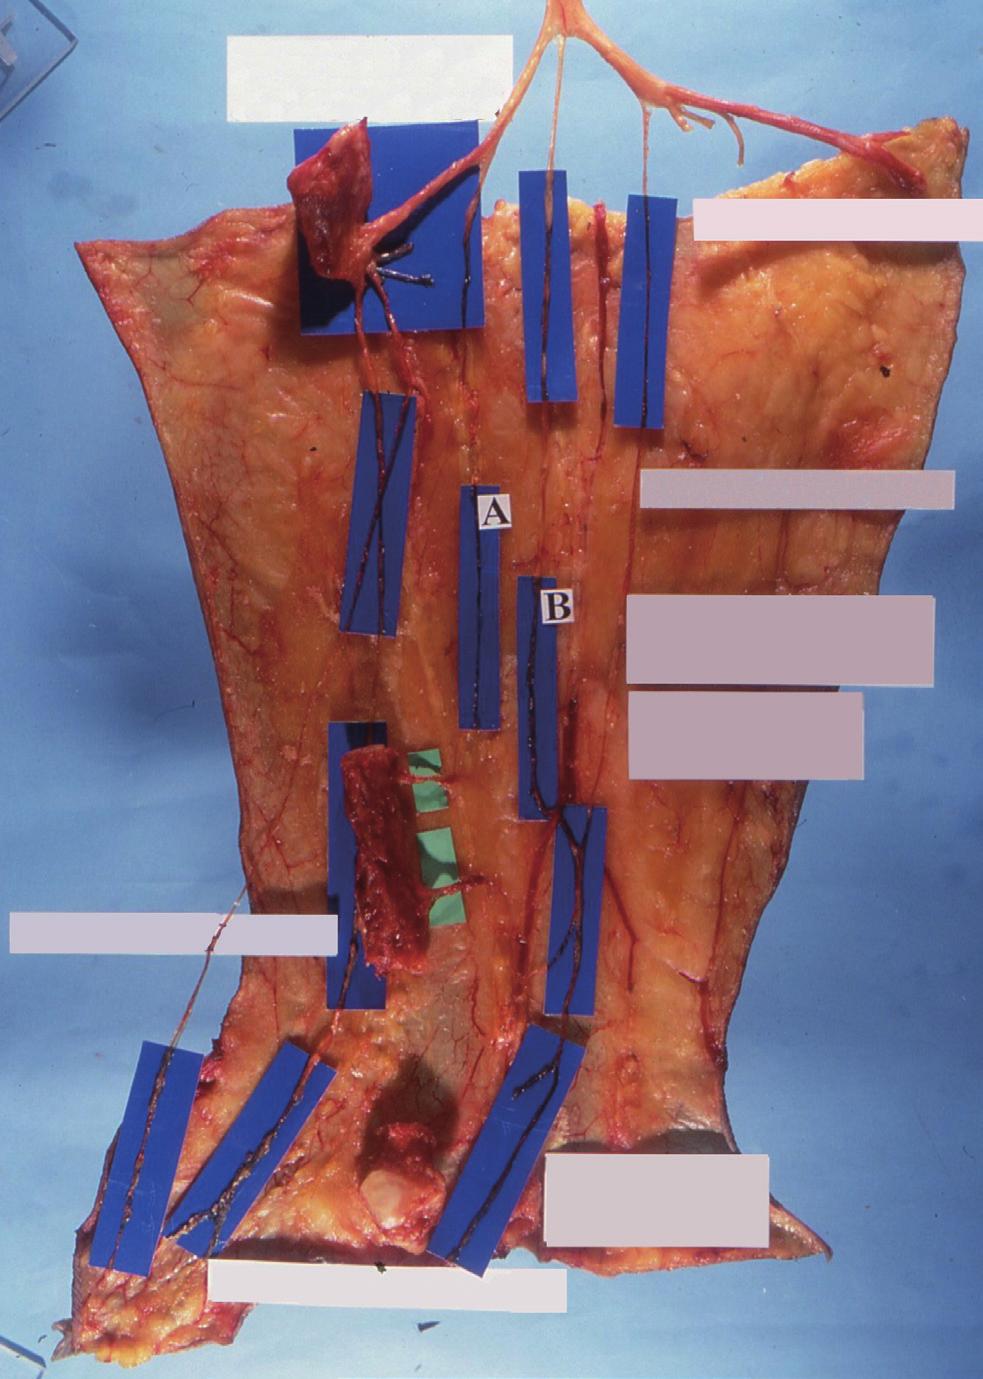 Vol. 41 / No. 6 / November 2014 the subcutaneous entry point to form the common sural nerve at a mean distance of 14.5 cm (11.5 18 cm) proximal to the lateral mallelolus (Table 1).